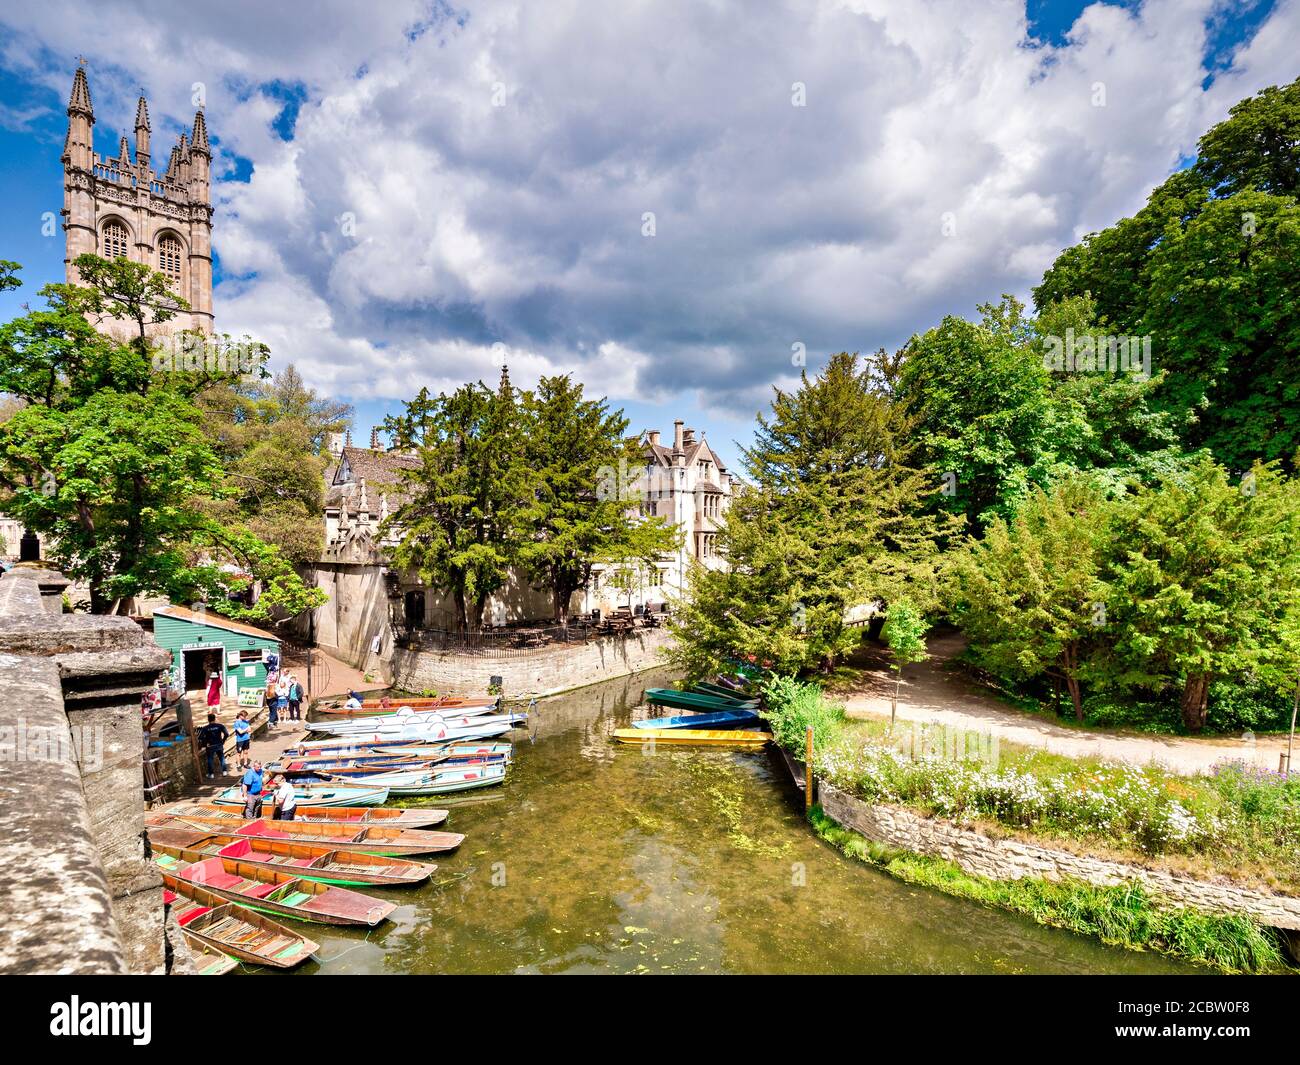 6 June 2019: Oxford, UK - Punts lined up ready for tourists on the River Cherwell, on a fine sunny summer day, tourists ready to get on board, Stock Photo